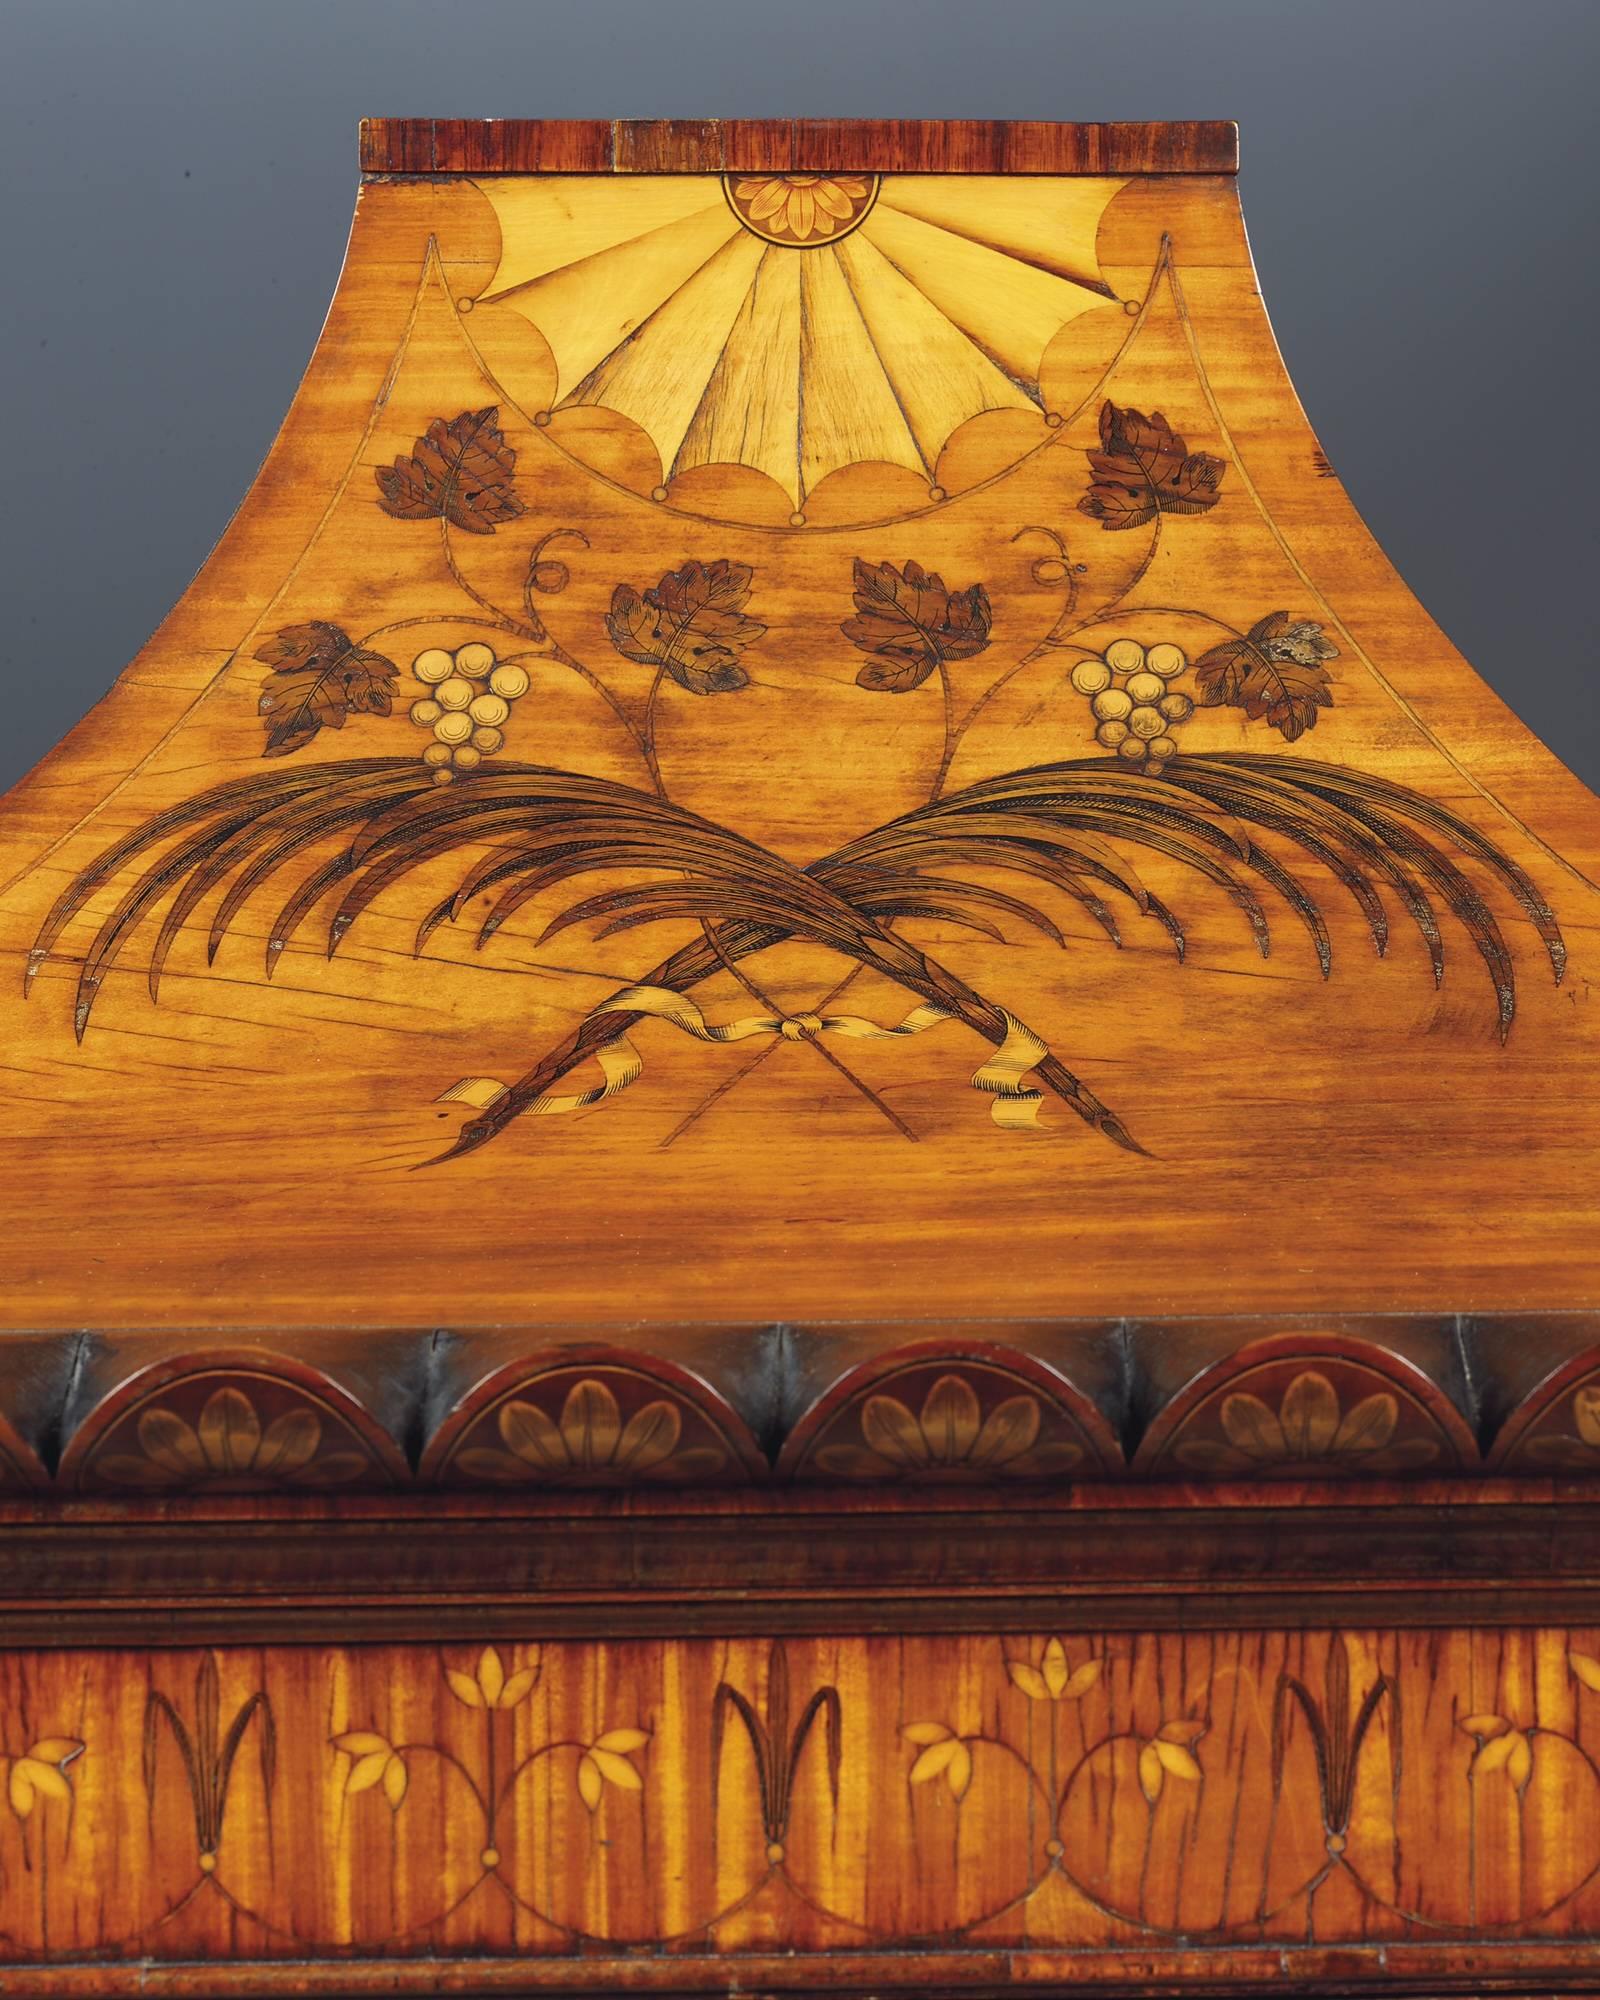 An exceptional George III satinwood and marquetry cabinet on stand, attributed to Mayhew and Ince, executed in golden satinwood and inlaid with exquisite marquetry detail in a variety of exotic timbers, the pagoda top surmounted with a fan shape